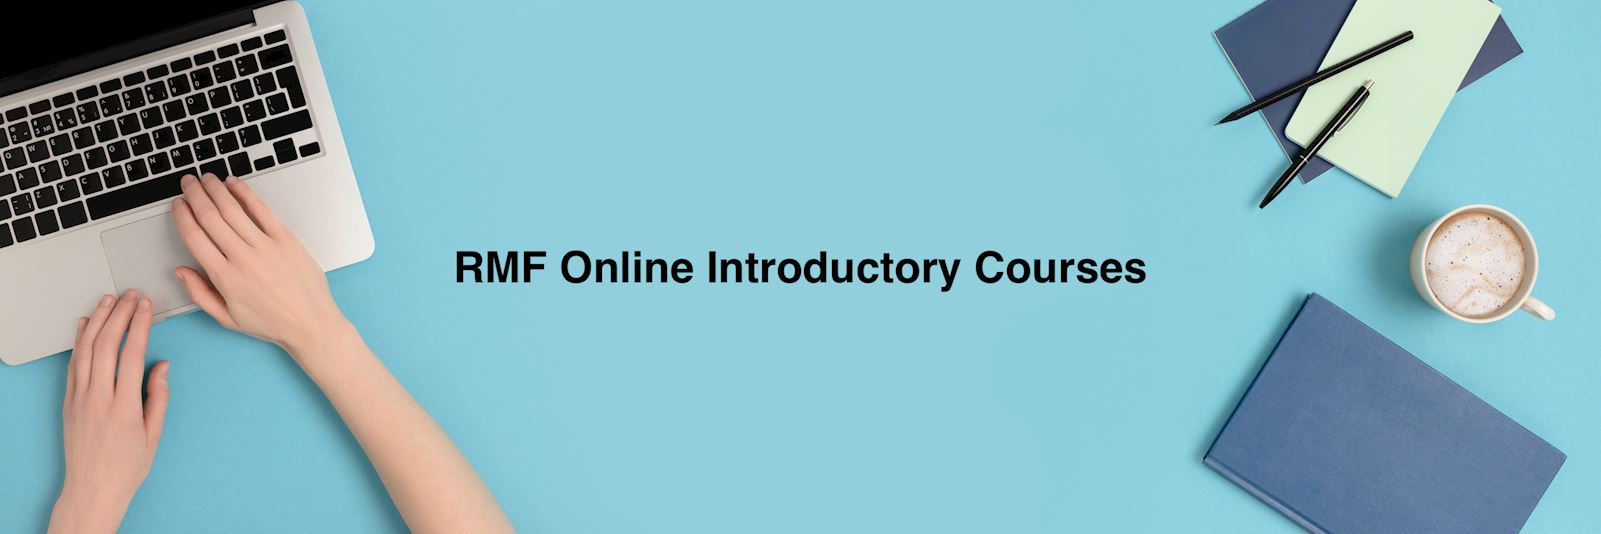 RMF Introductory Course Banner